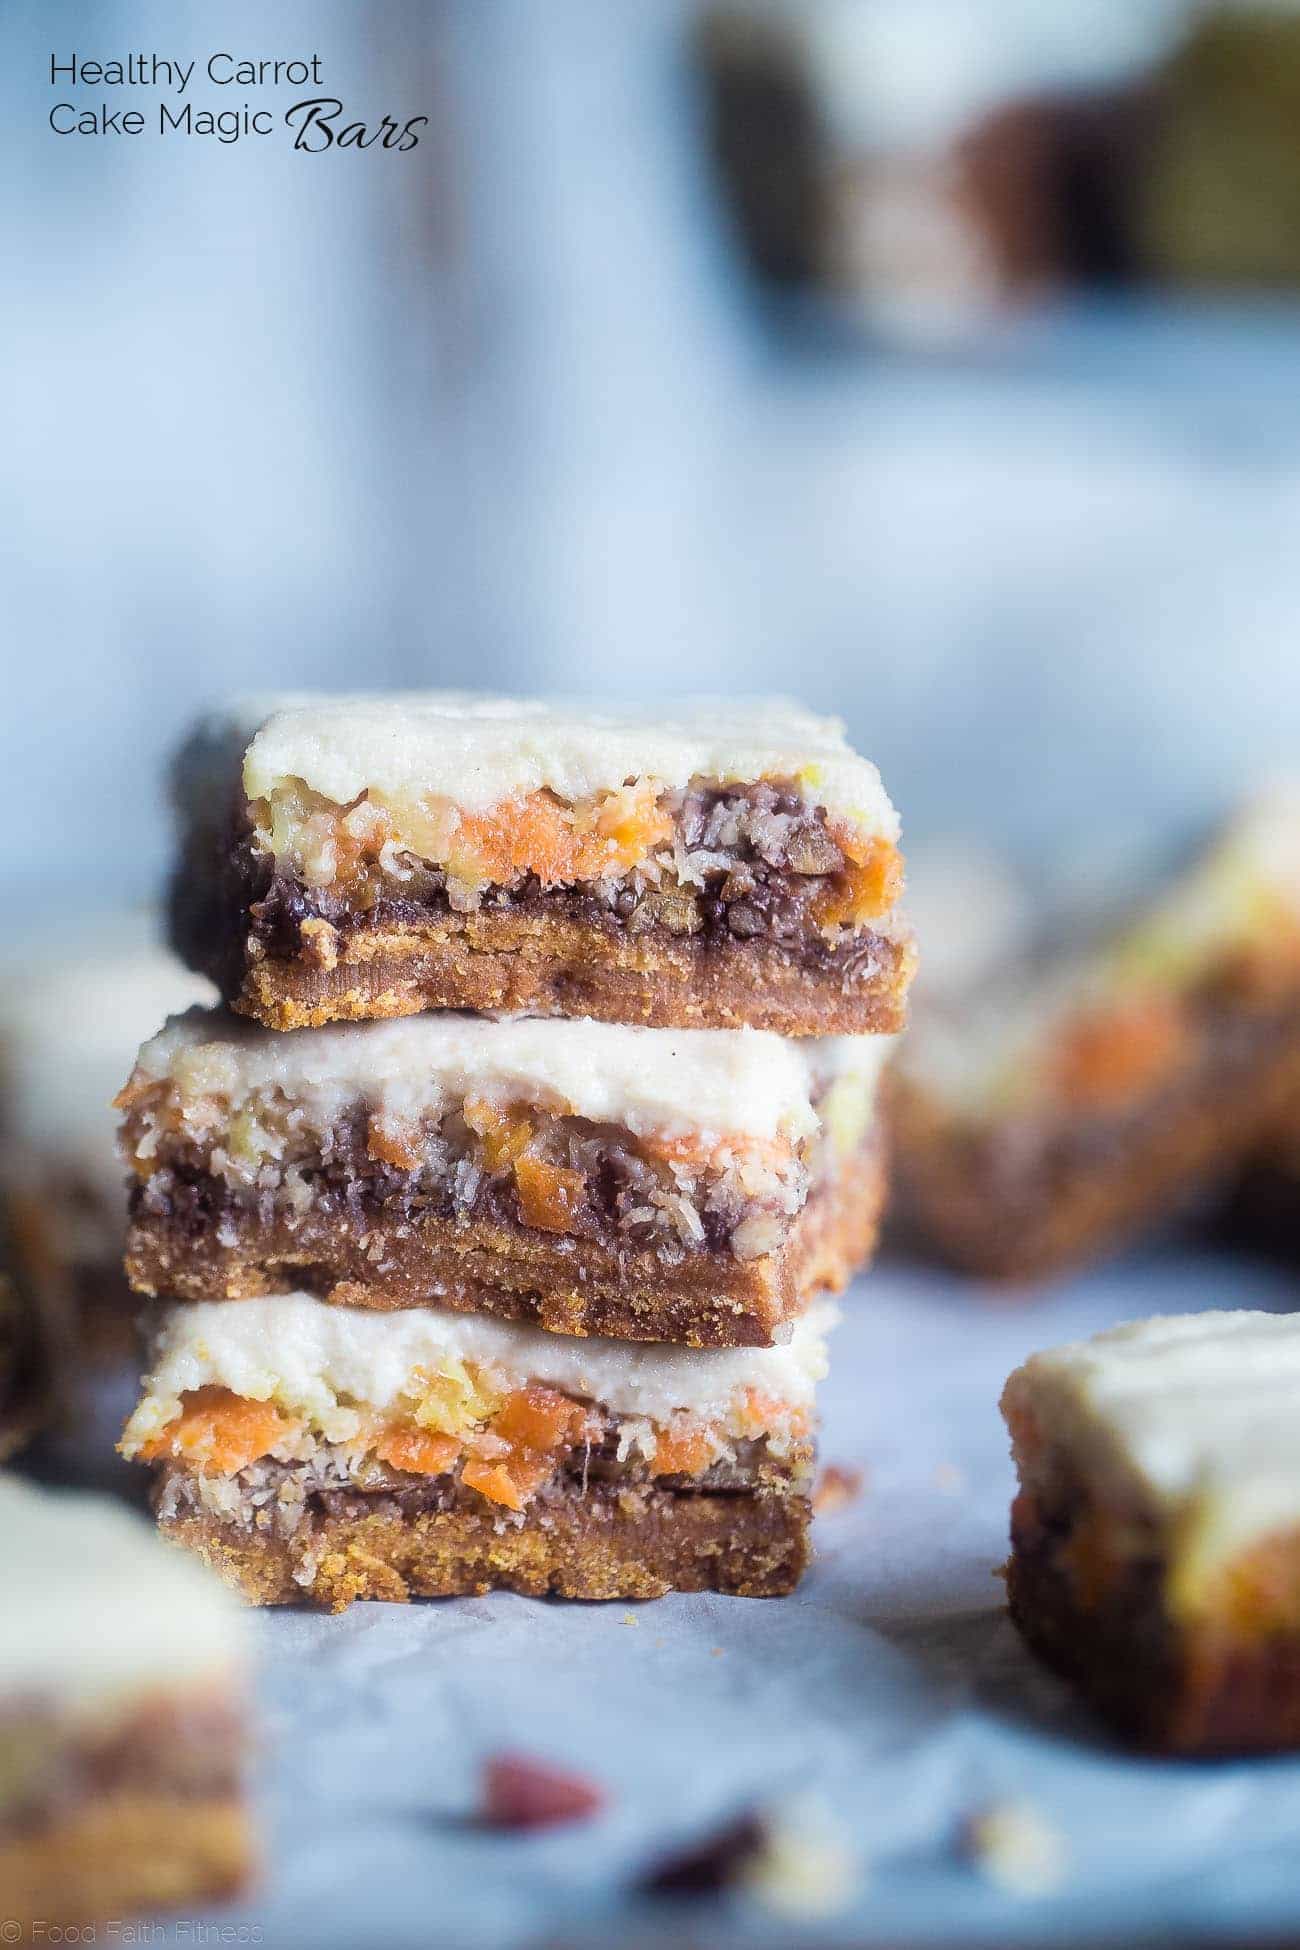 Carrot Cake Paleo Magic Cookie Bars - These easy paleo and vegan magic cookie bars taste like the carrot cake except in gluten, grain and dairy free form - complete with frosting! A healthy dessert for Easter! | Foodfaithfitness.com | @FoodFaithFit